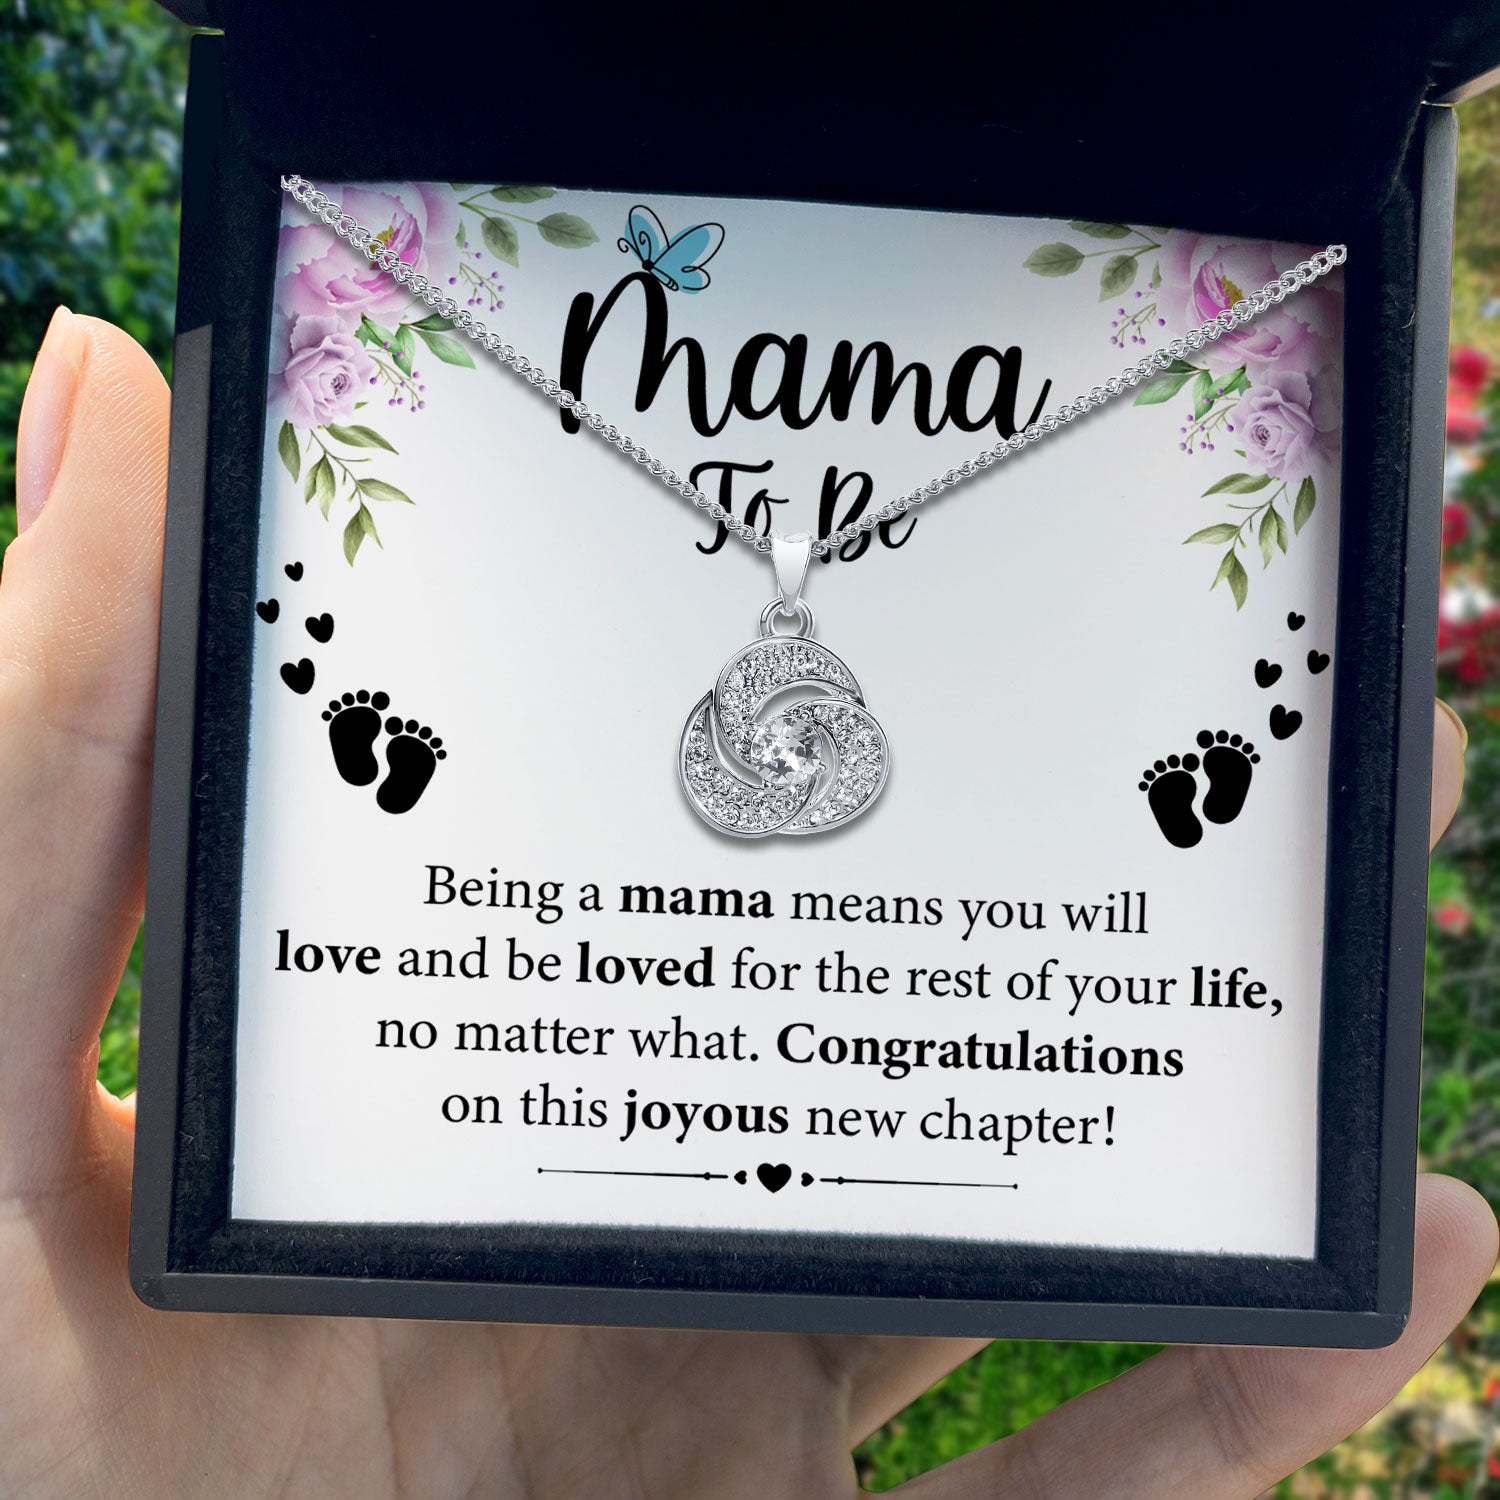 To My To Be Mama - Congratulations On This Joyous New Chapter - Tryndi Love Knot Necklace